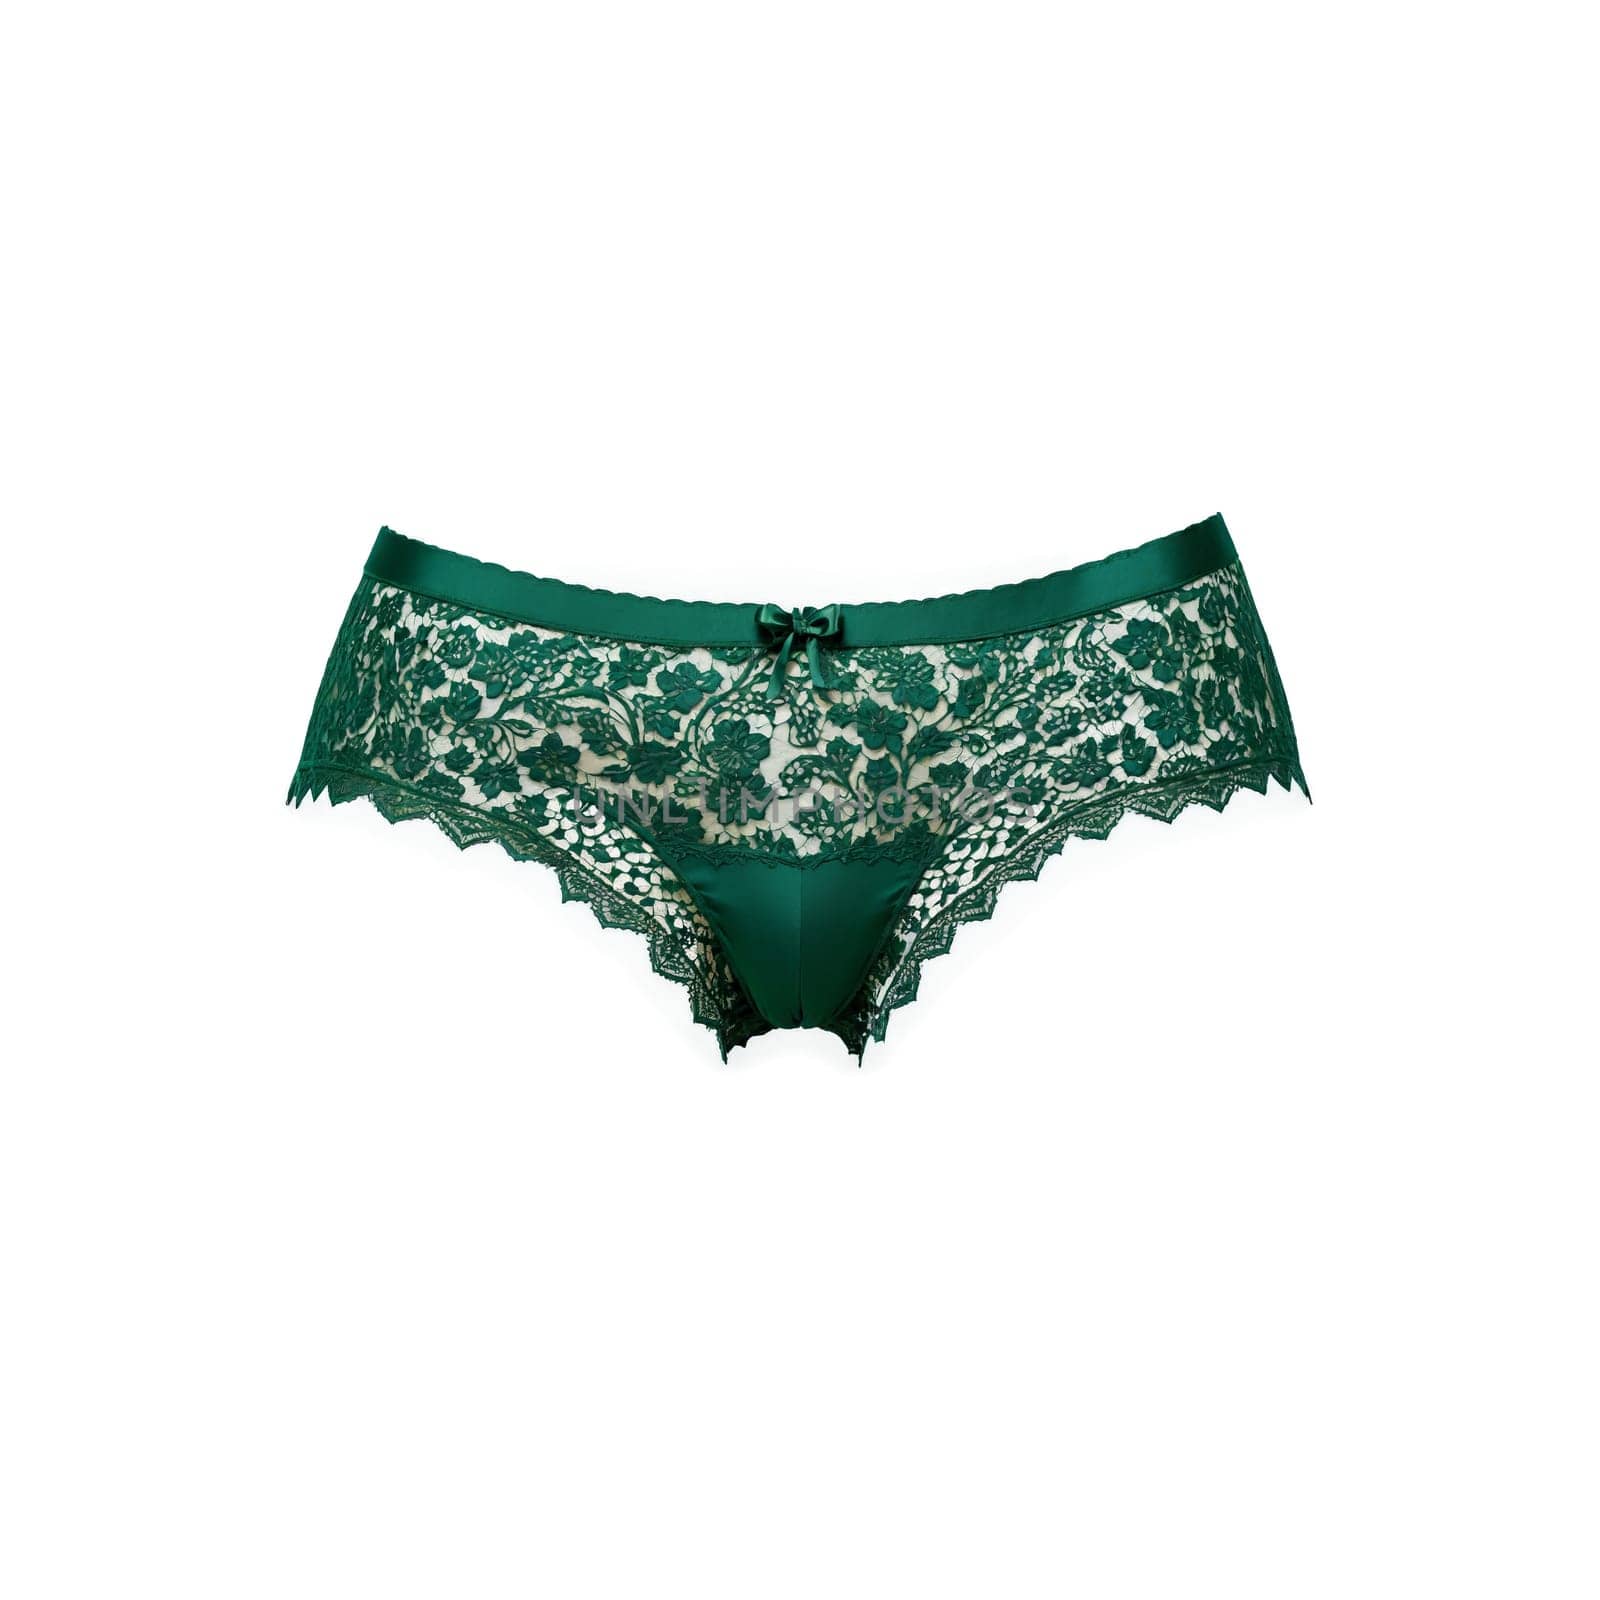 Green Lace Boyshorts A pair of green lace boyshorts with intricate lace detailing and a by panophotograph